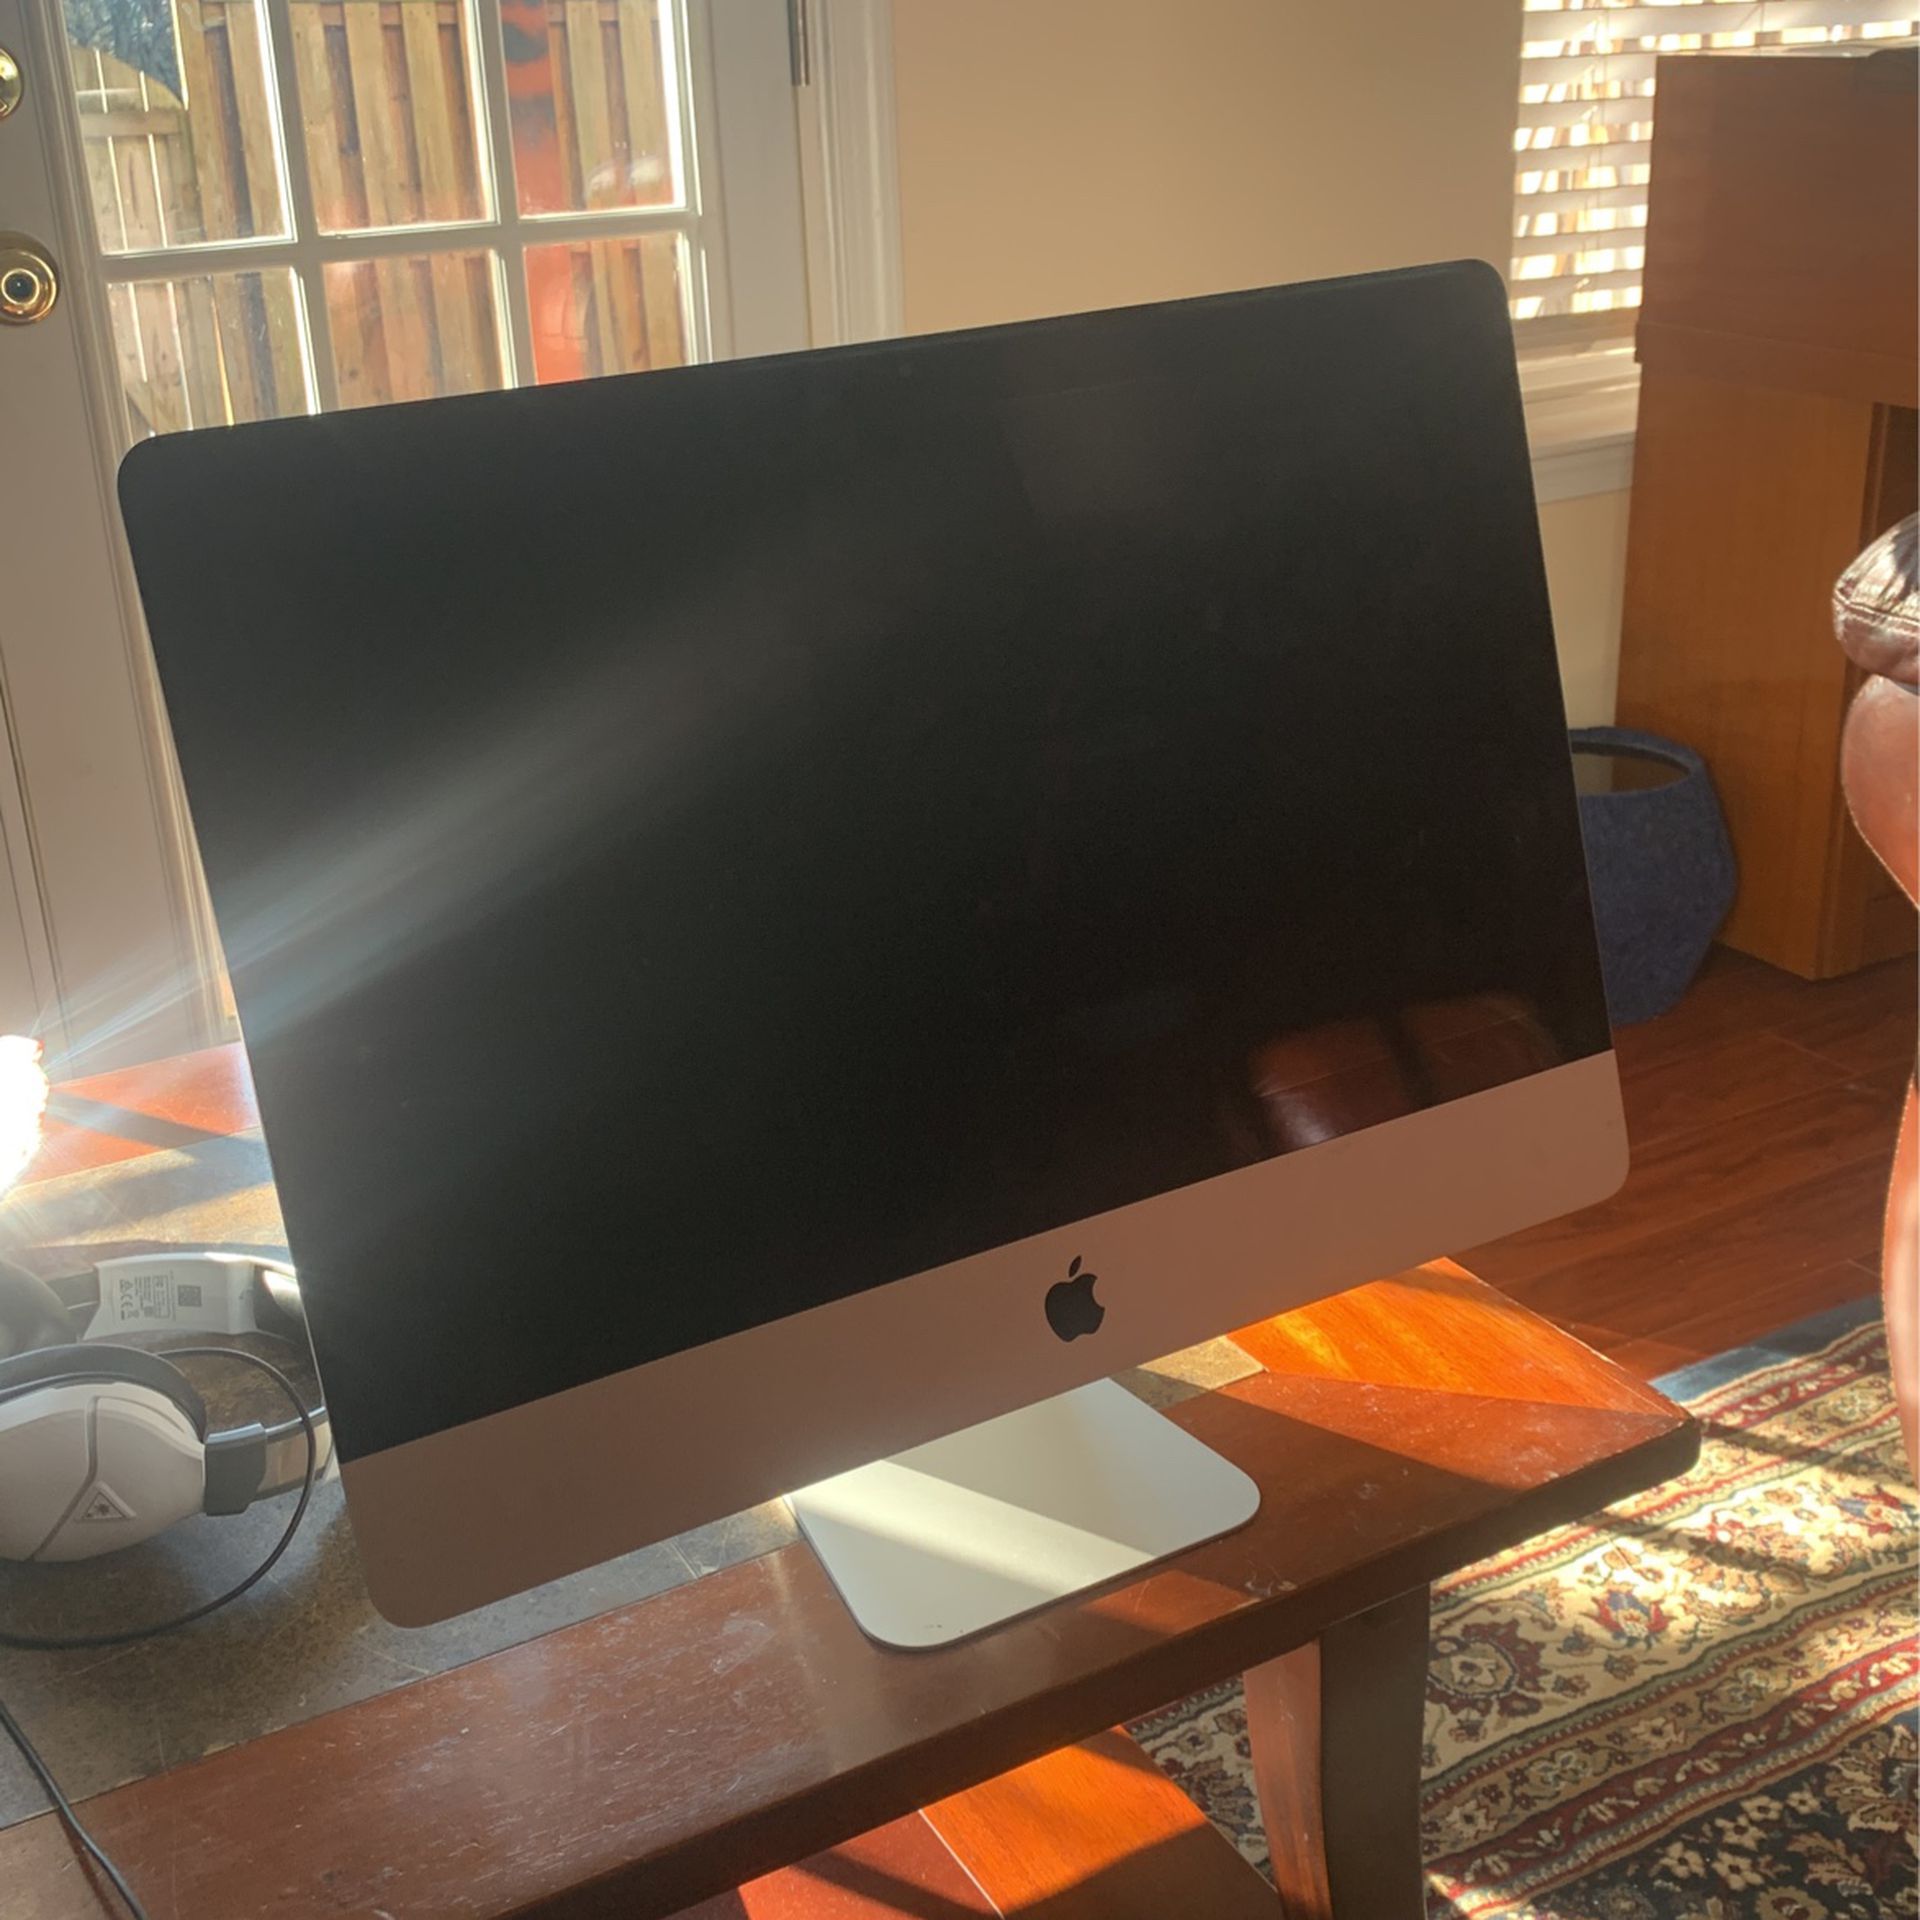 iMac 21 Inch (barely used) Late 2013/early 2014